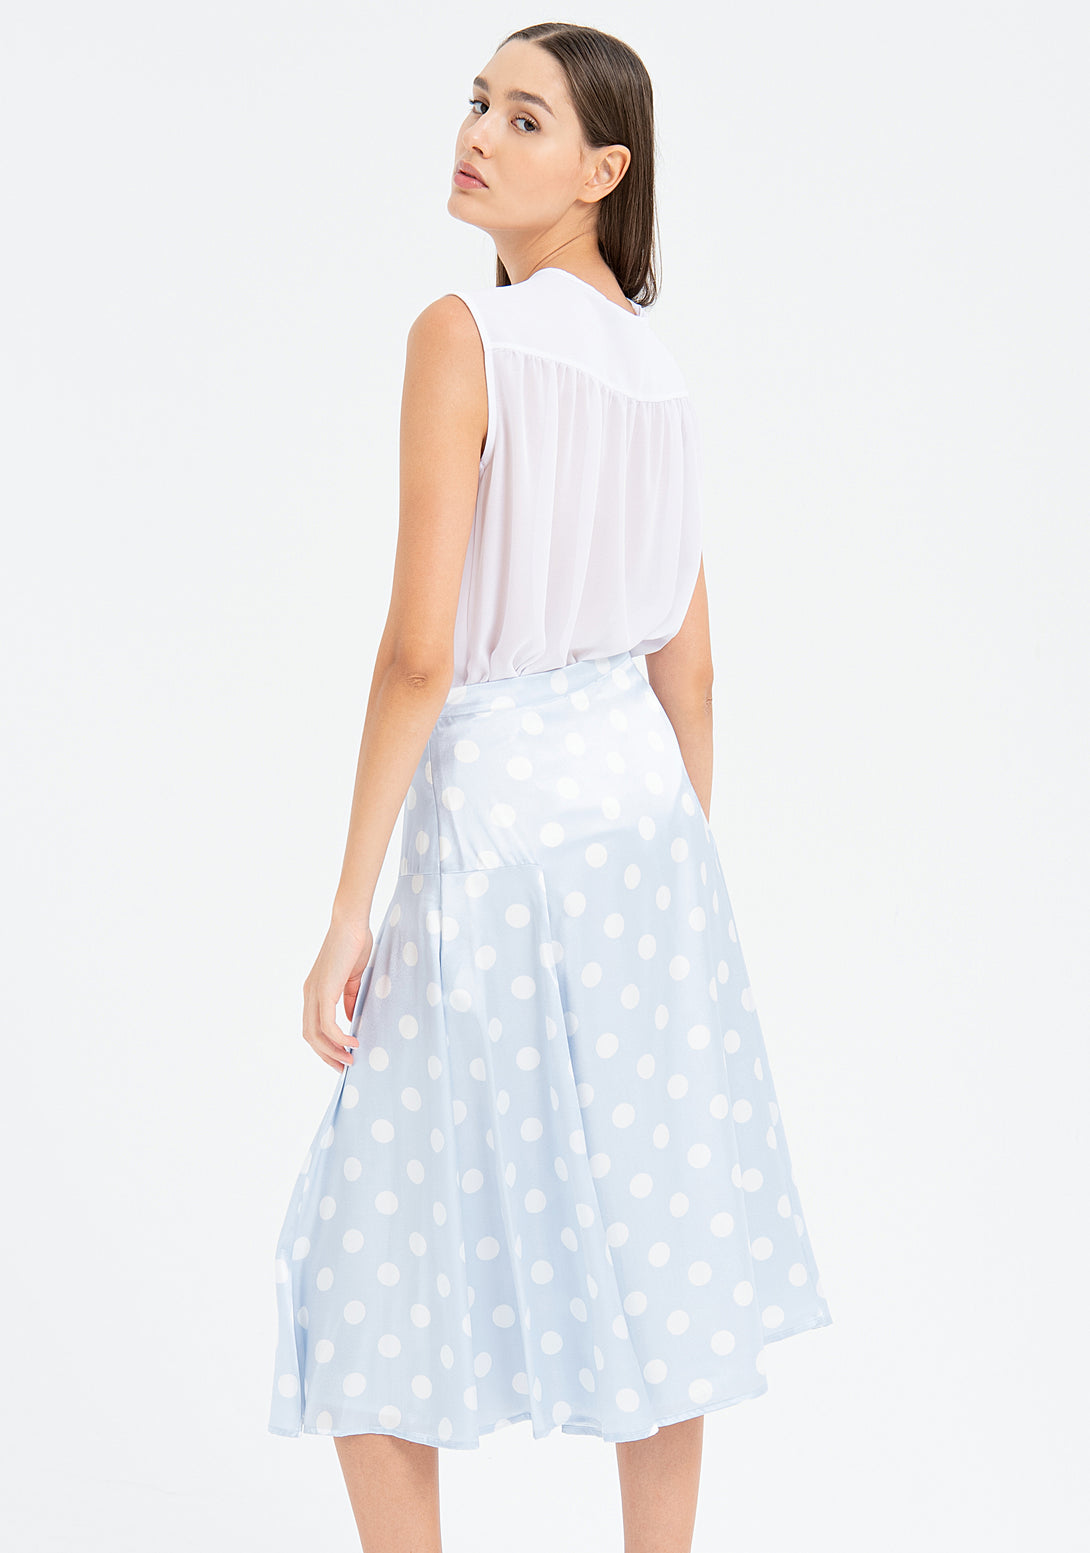 Skirt flared fit, middle length, made in satin fabric with polka dots pattern